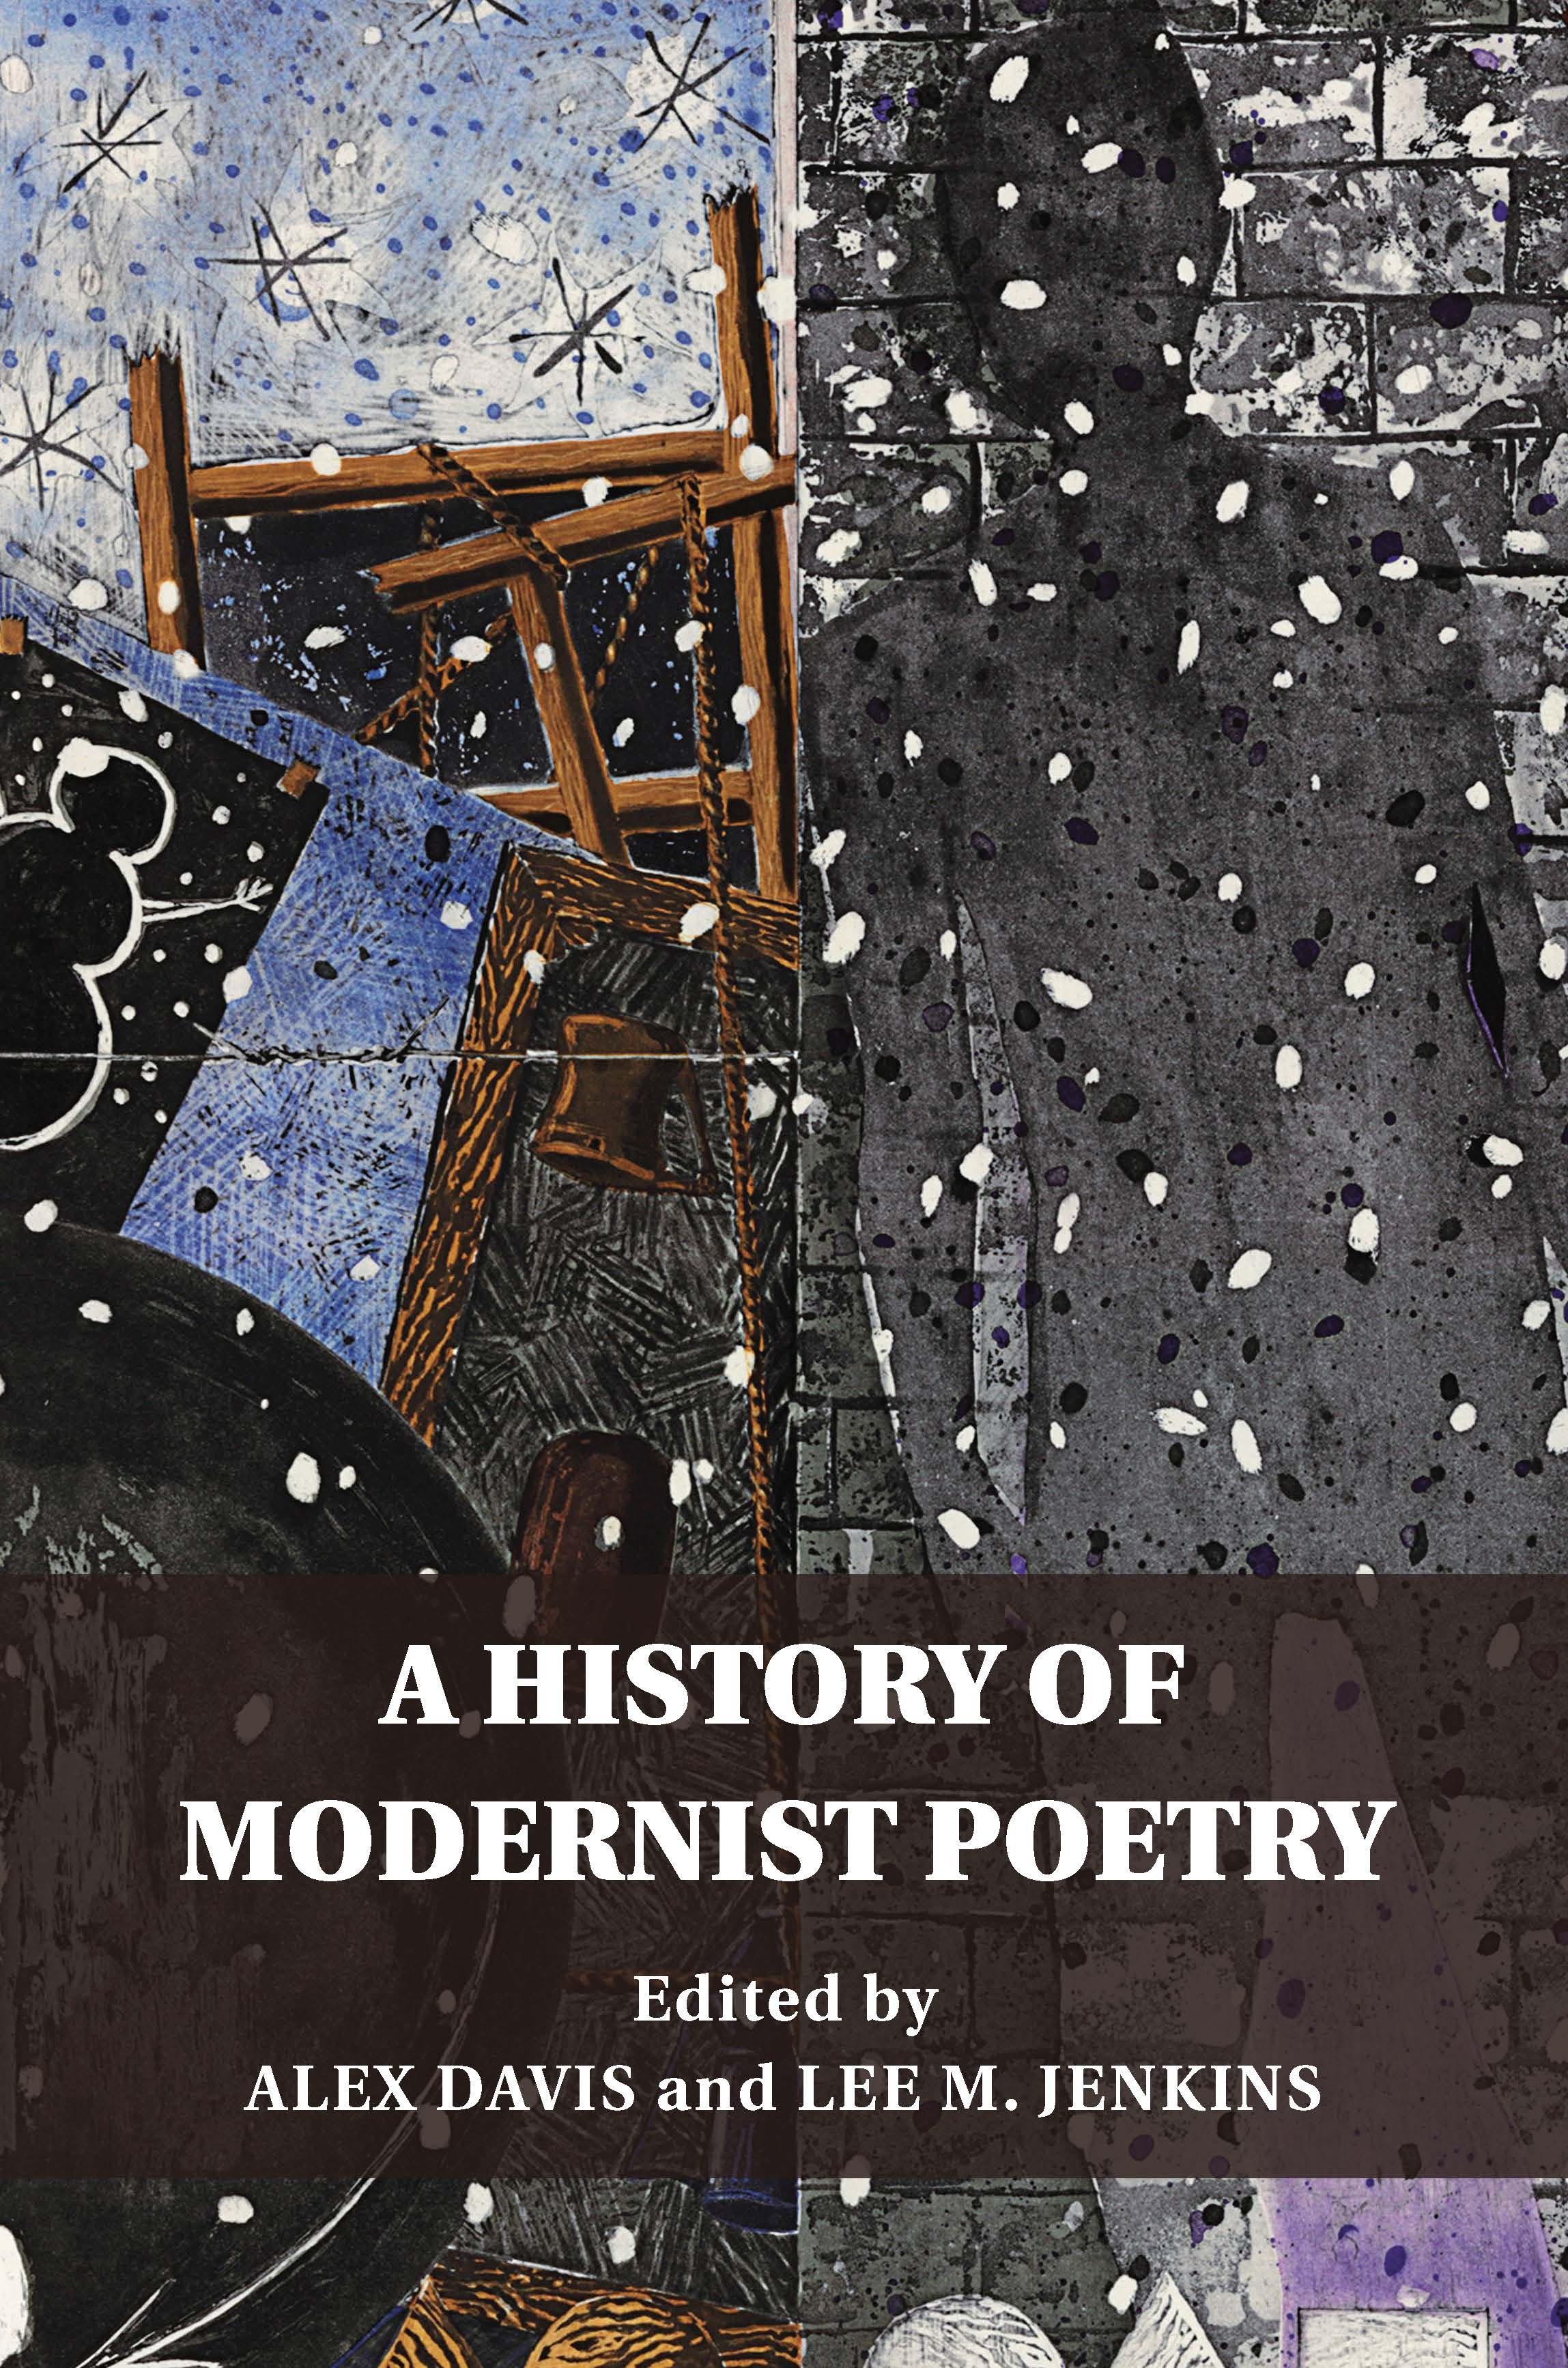 Review of 'A History of Modernist Poetry' Ed. Alex Davis & Lee M. Jenkins